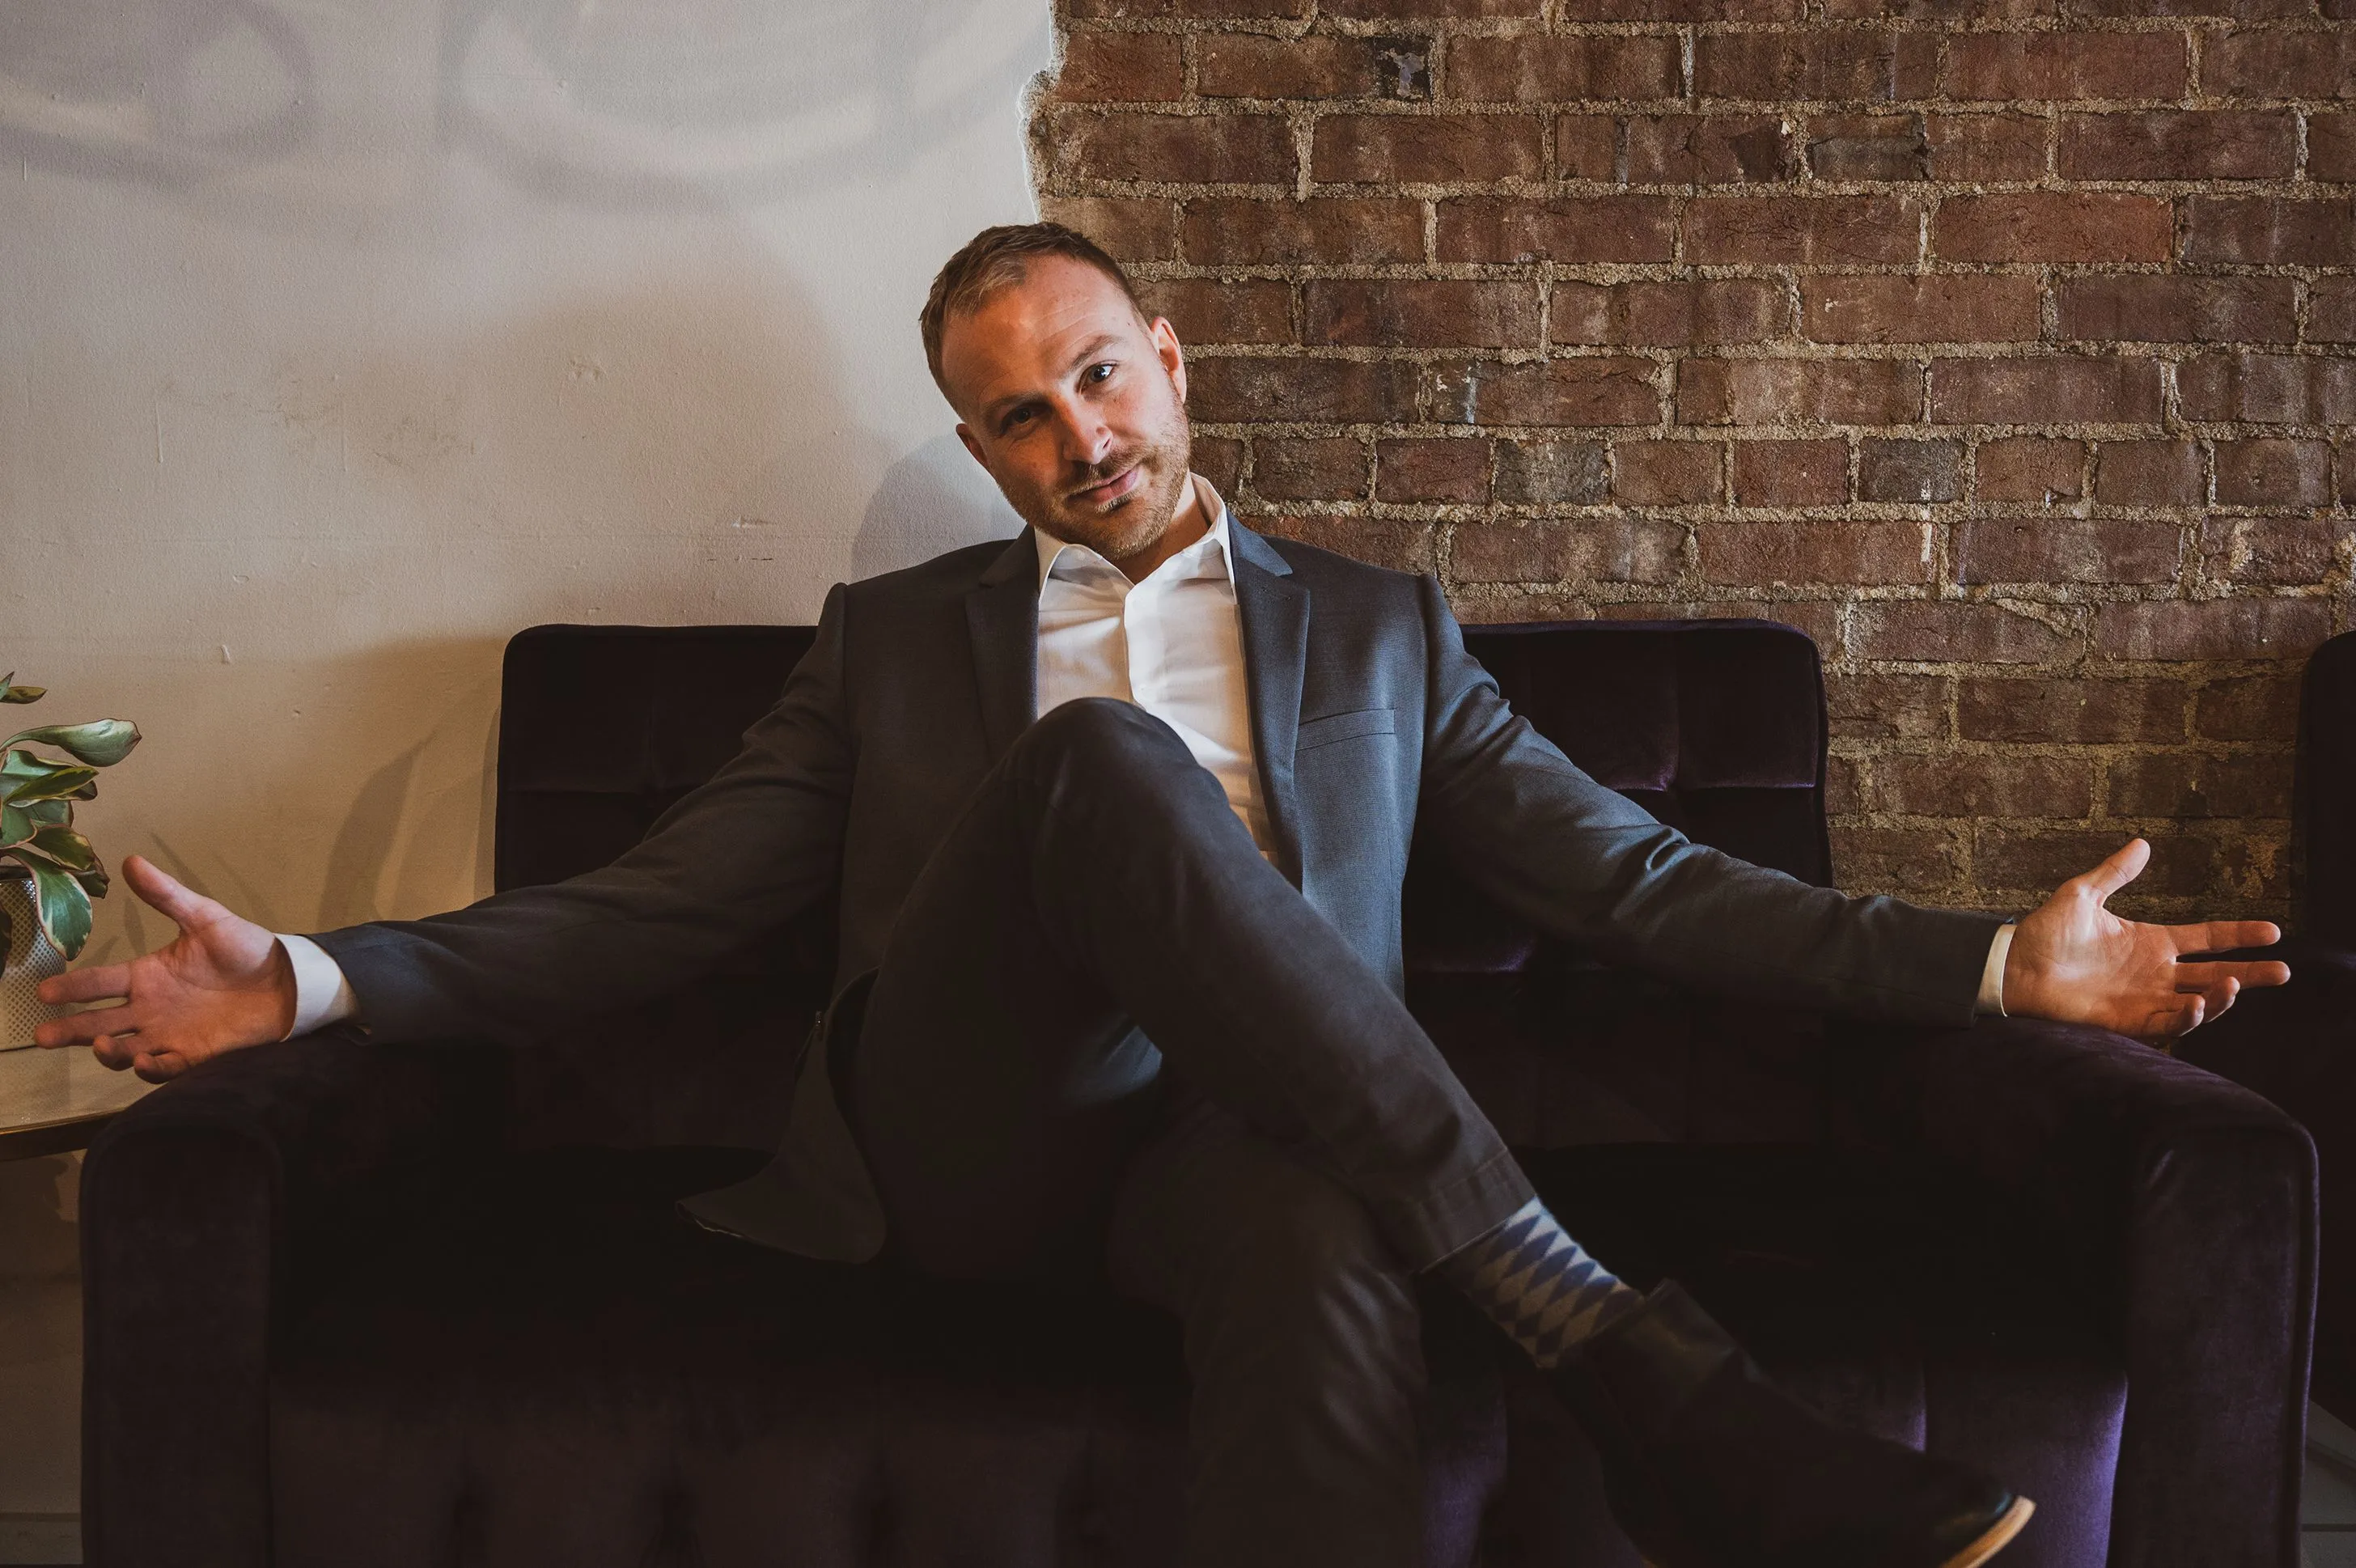 Man in a suit sitting relaxed with arms outstretched on a couch against a brick wall background.